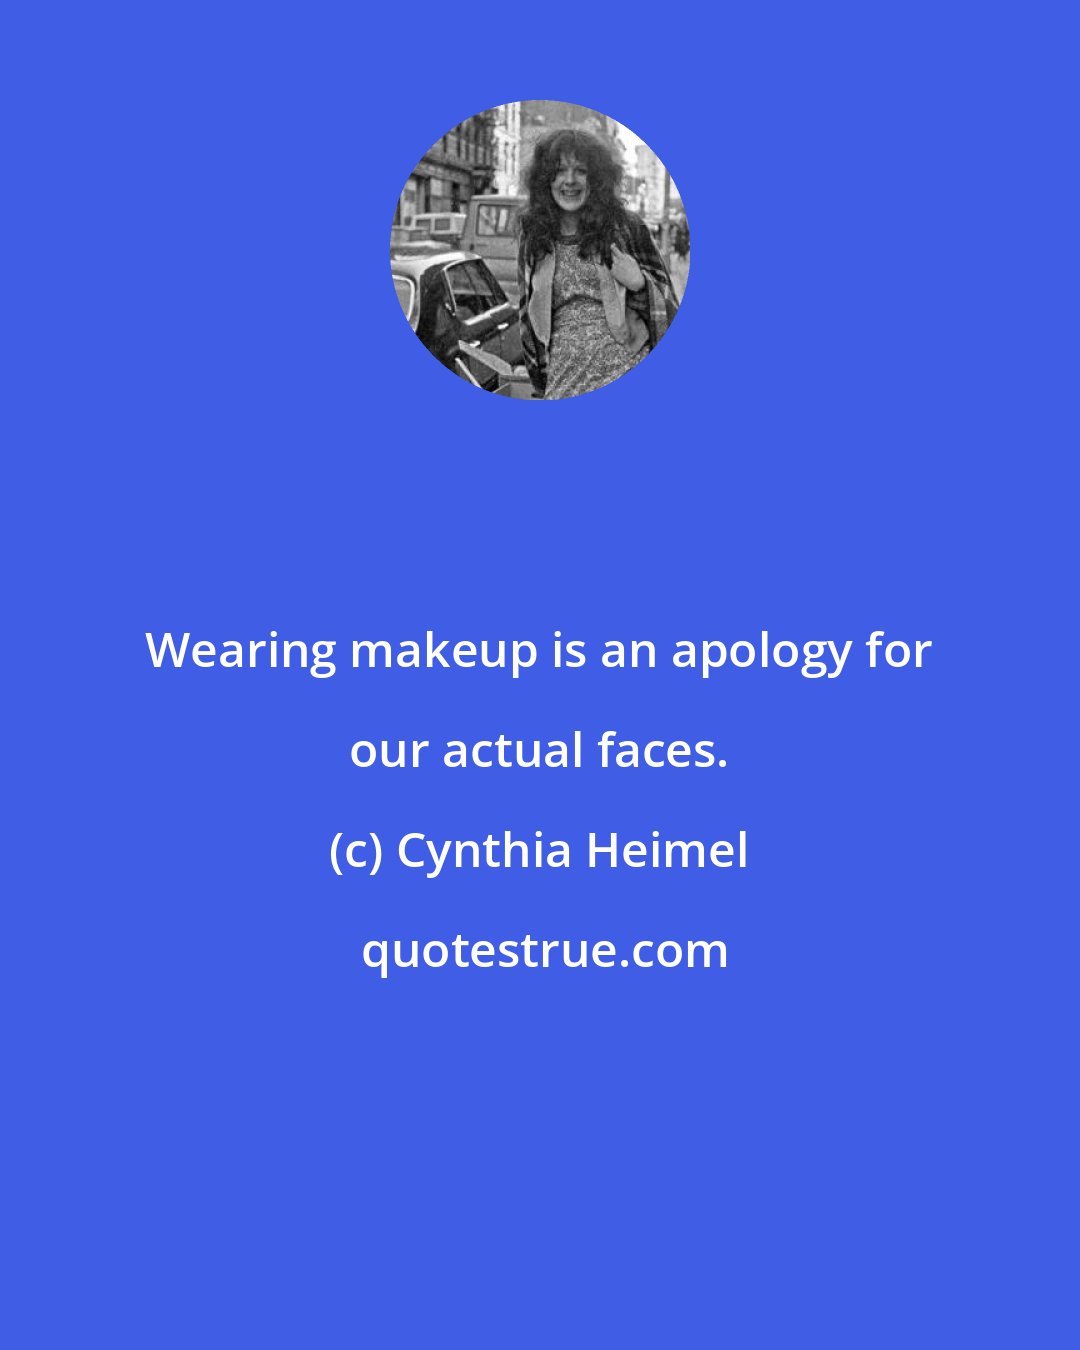 Cynthia Heimel: Wearing makeup is an apology for our actual faces.